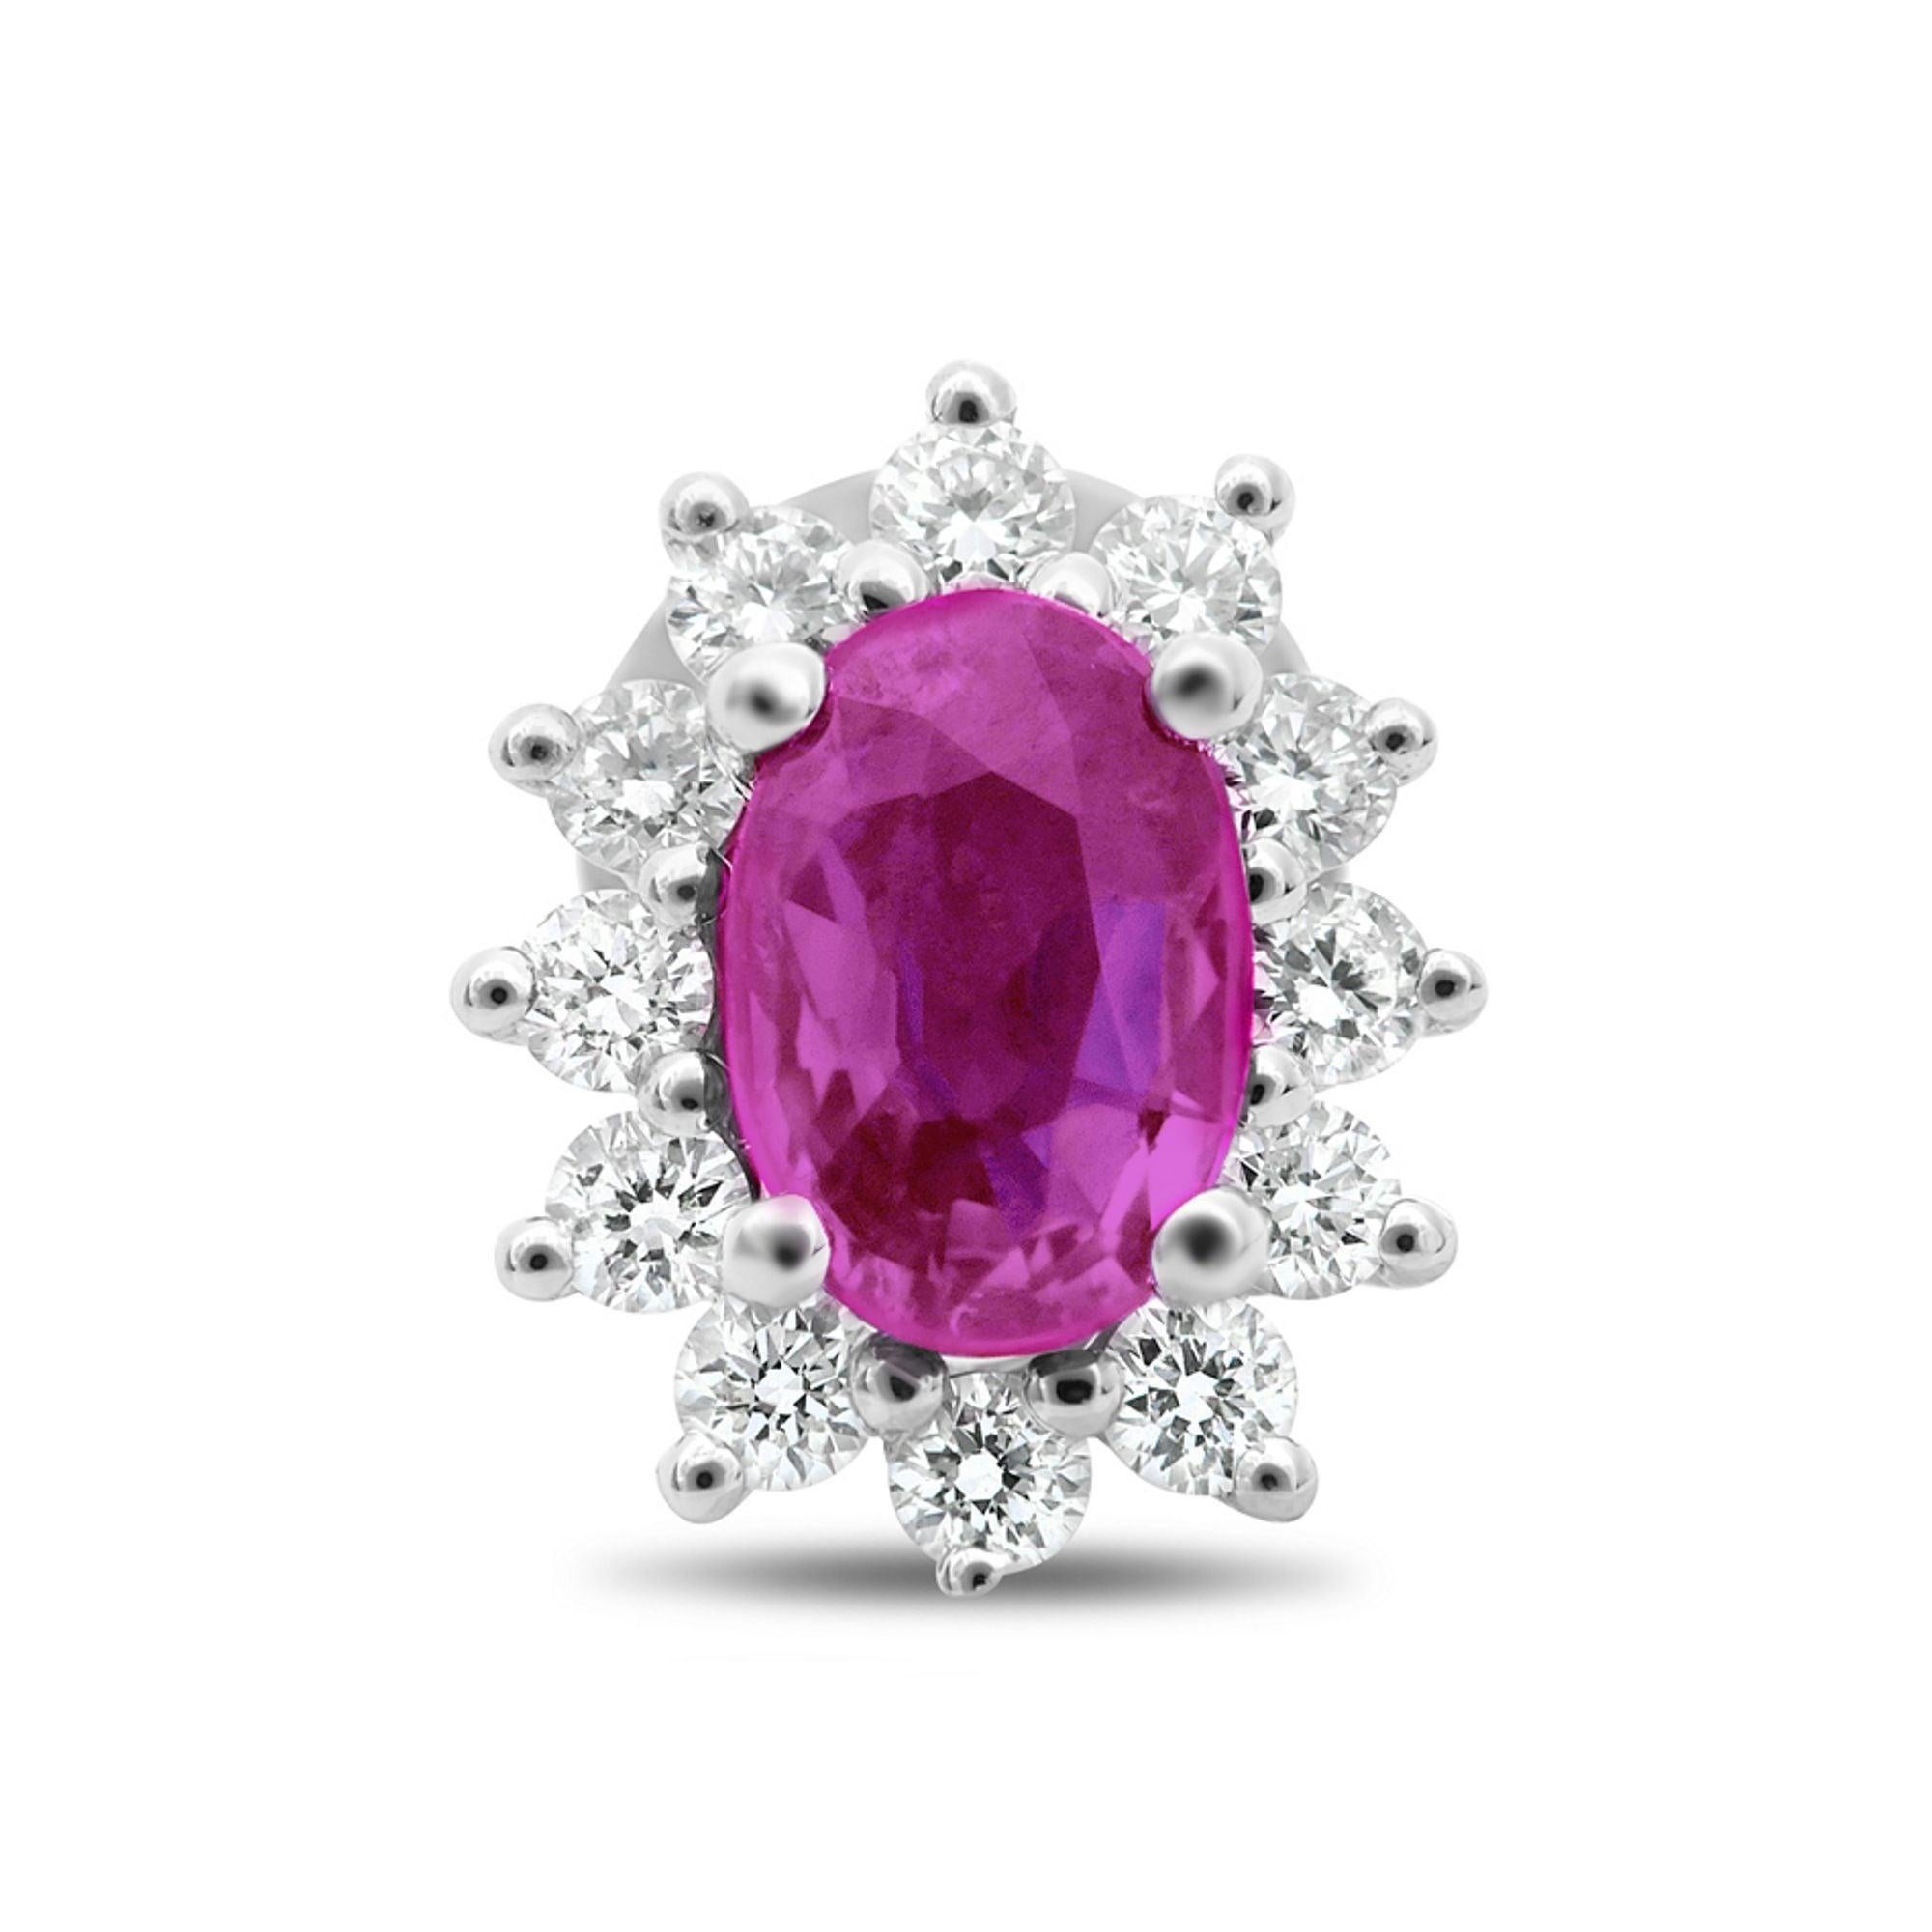 At the center of these eye-catching 18 karat white gold stud earrings rest 1.25 carats of brilliant oval cut pink sapphires. A sparkling halo of white diamonds surrounds each center stone with a total weight of 0.40 carats of round cut white